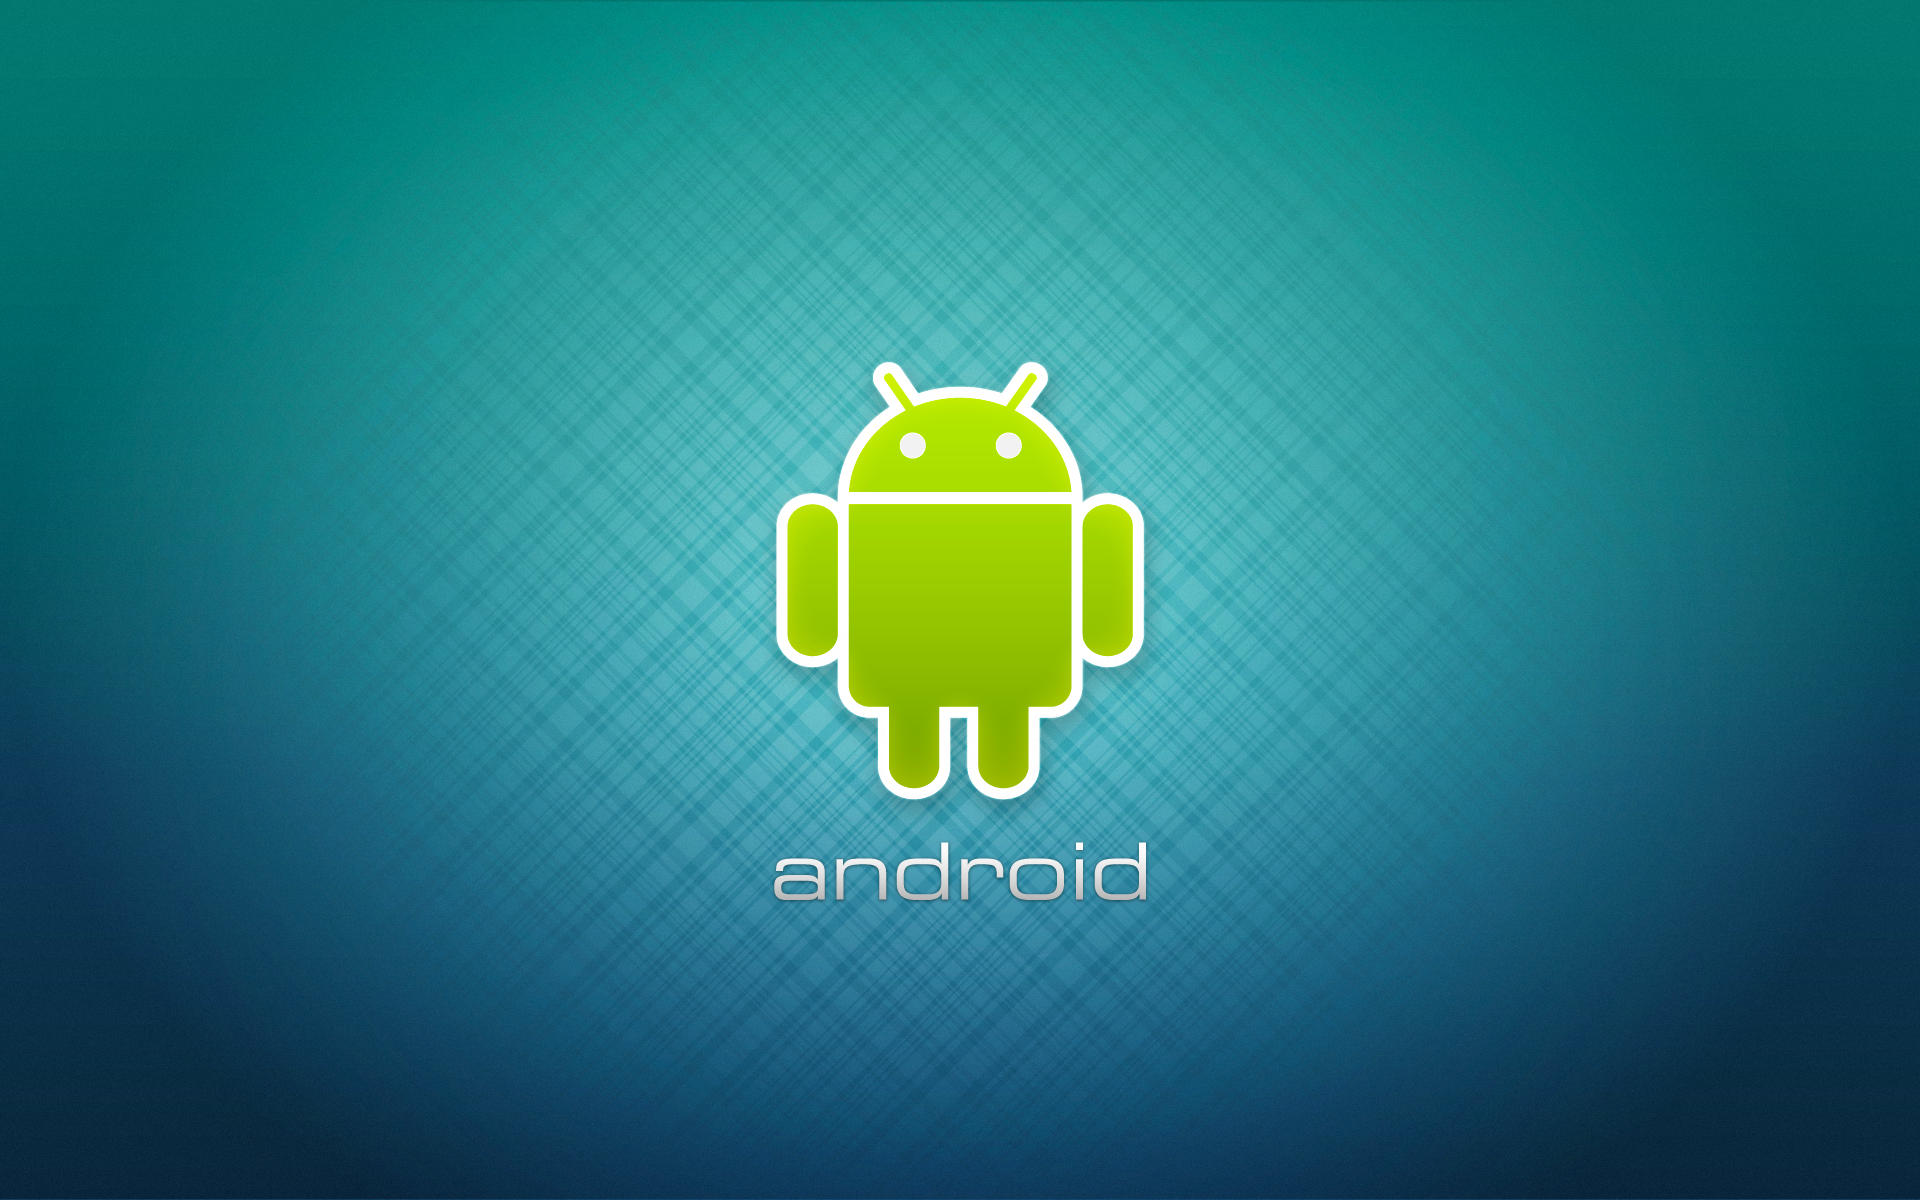 Download High Quality Android Wallpapers   Desktop